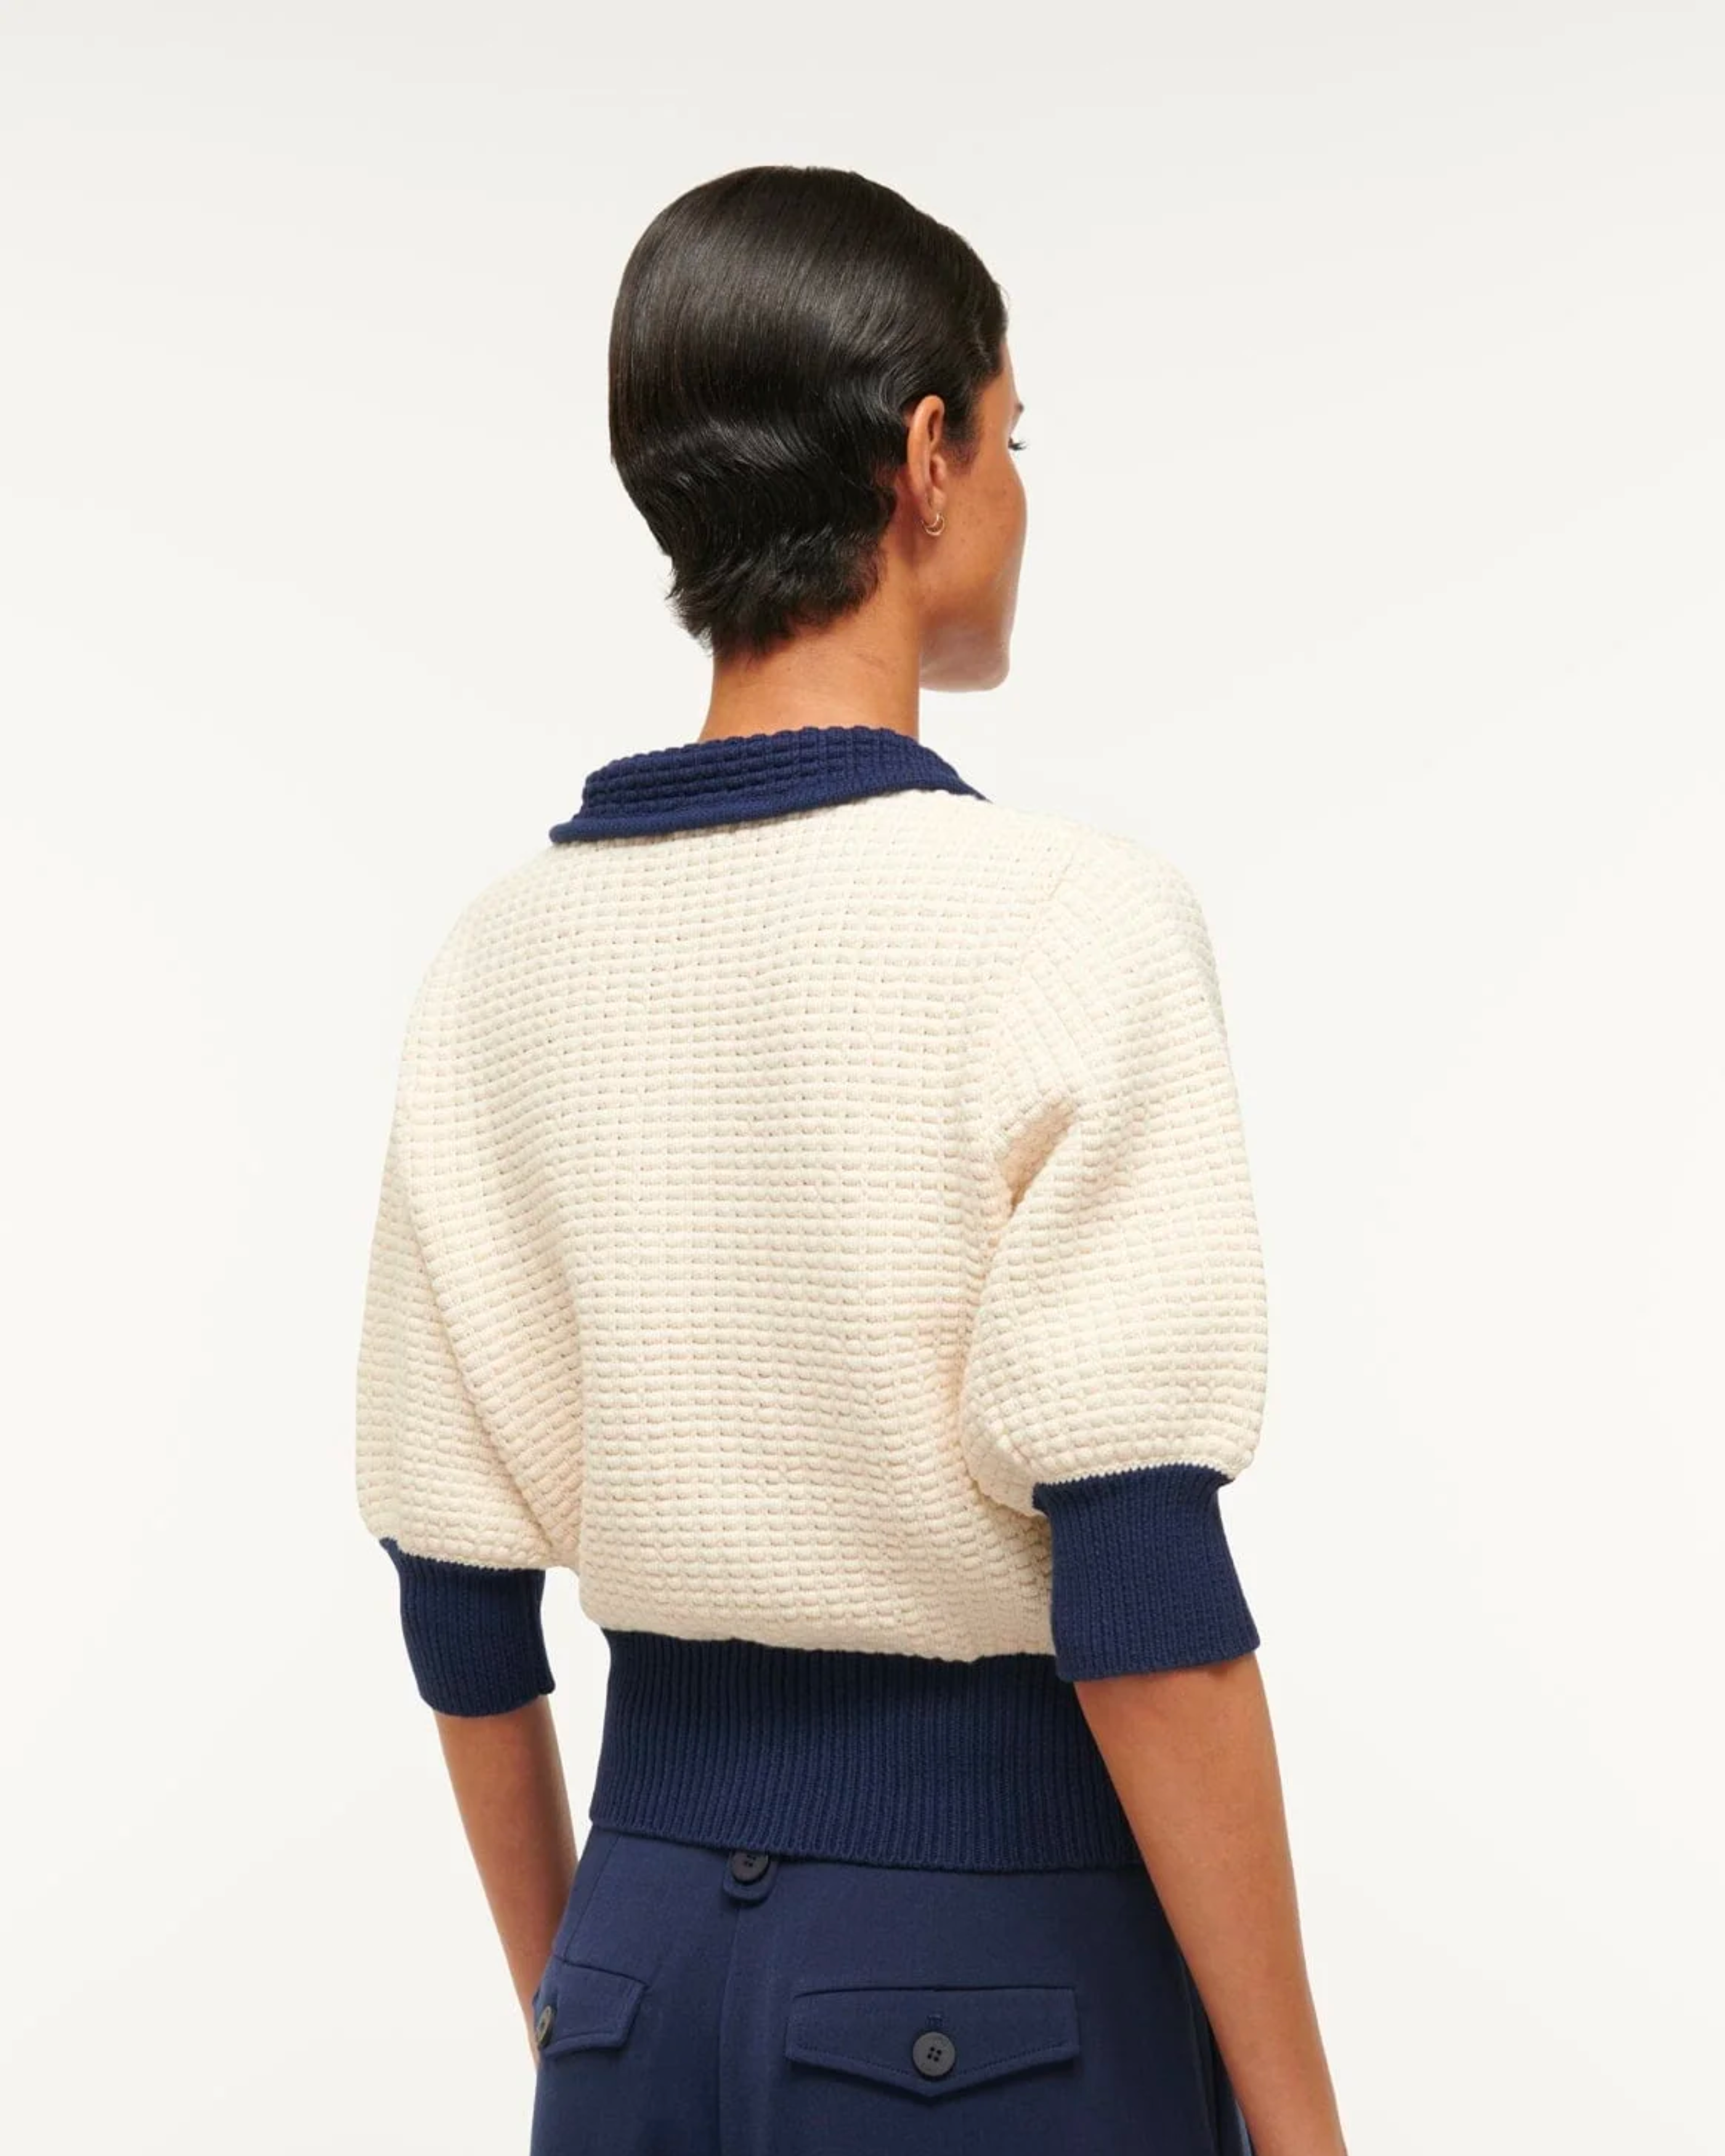 Staud Altea Sweater in Ivory and Navy